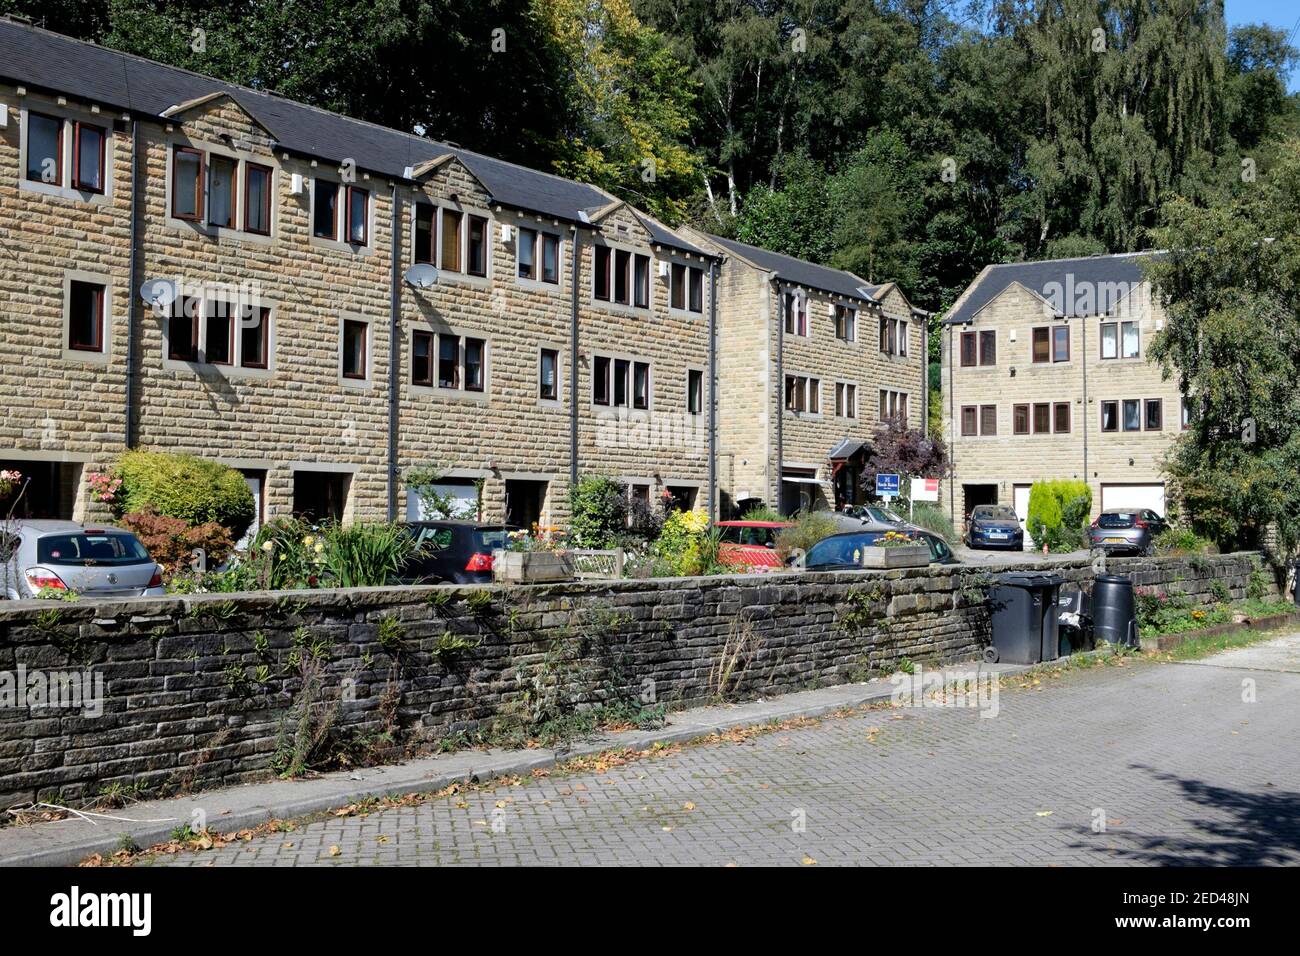 Modern houses in traditional style, Luddenden, West Yorkshire Stock Photo